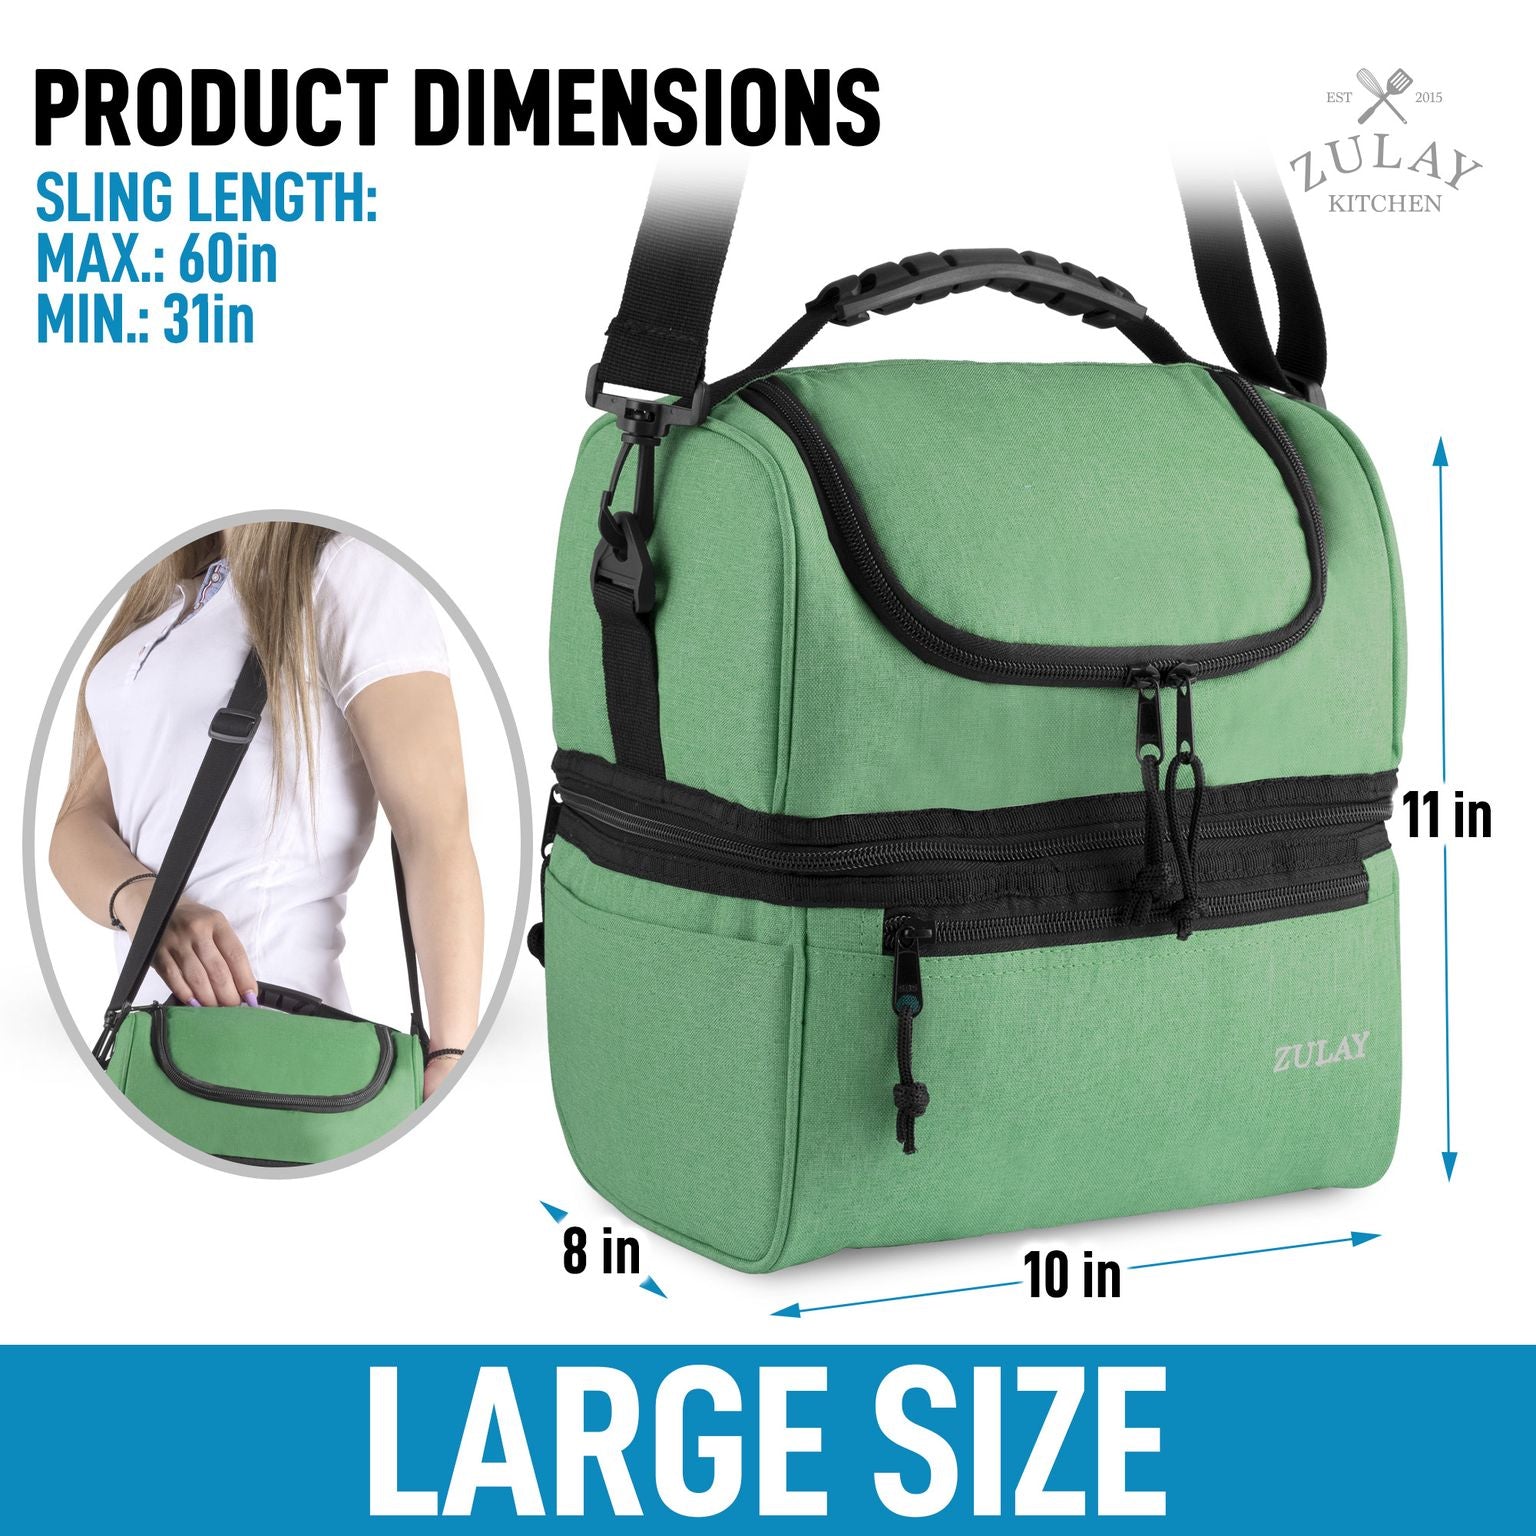 Zulay Kitchen Zulay 2 Pack Large Insulated Bag - Reusable Heavy Duty Insulated Food Delivery Bag with Longer Handles & Reinforced Bottom - Collapsible